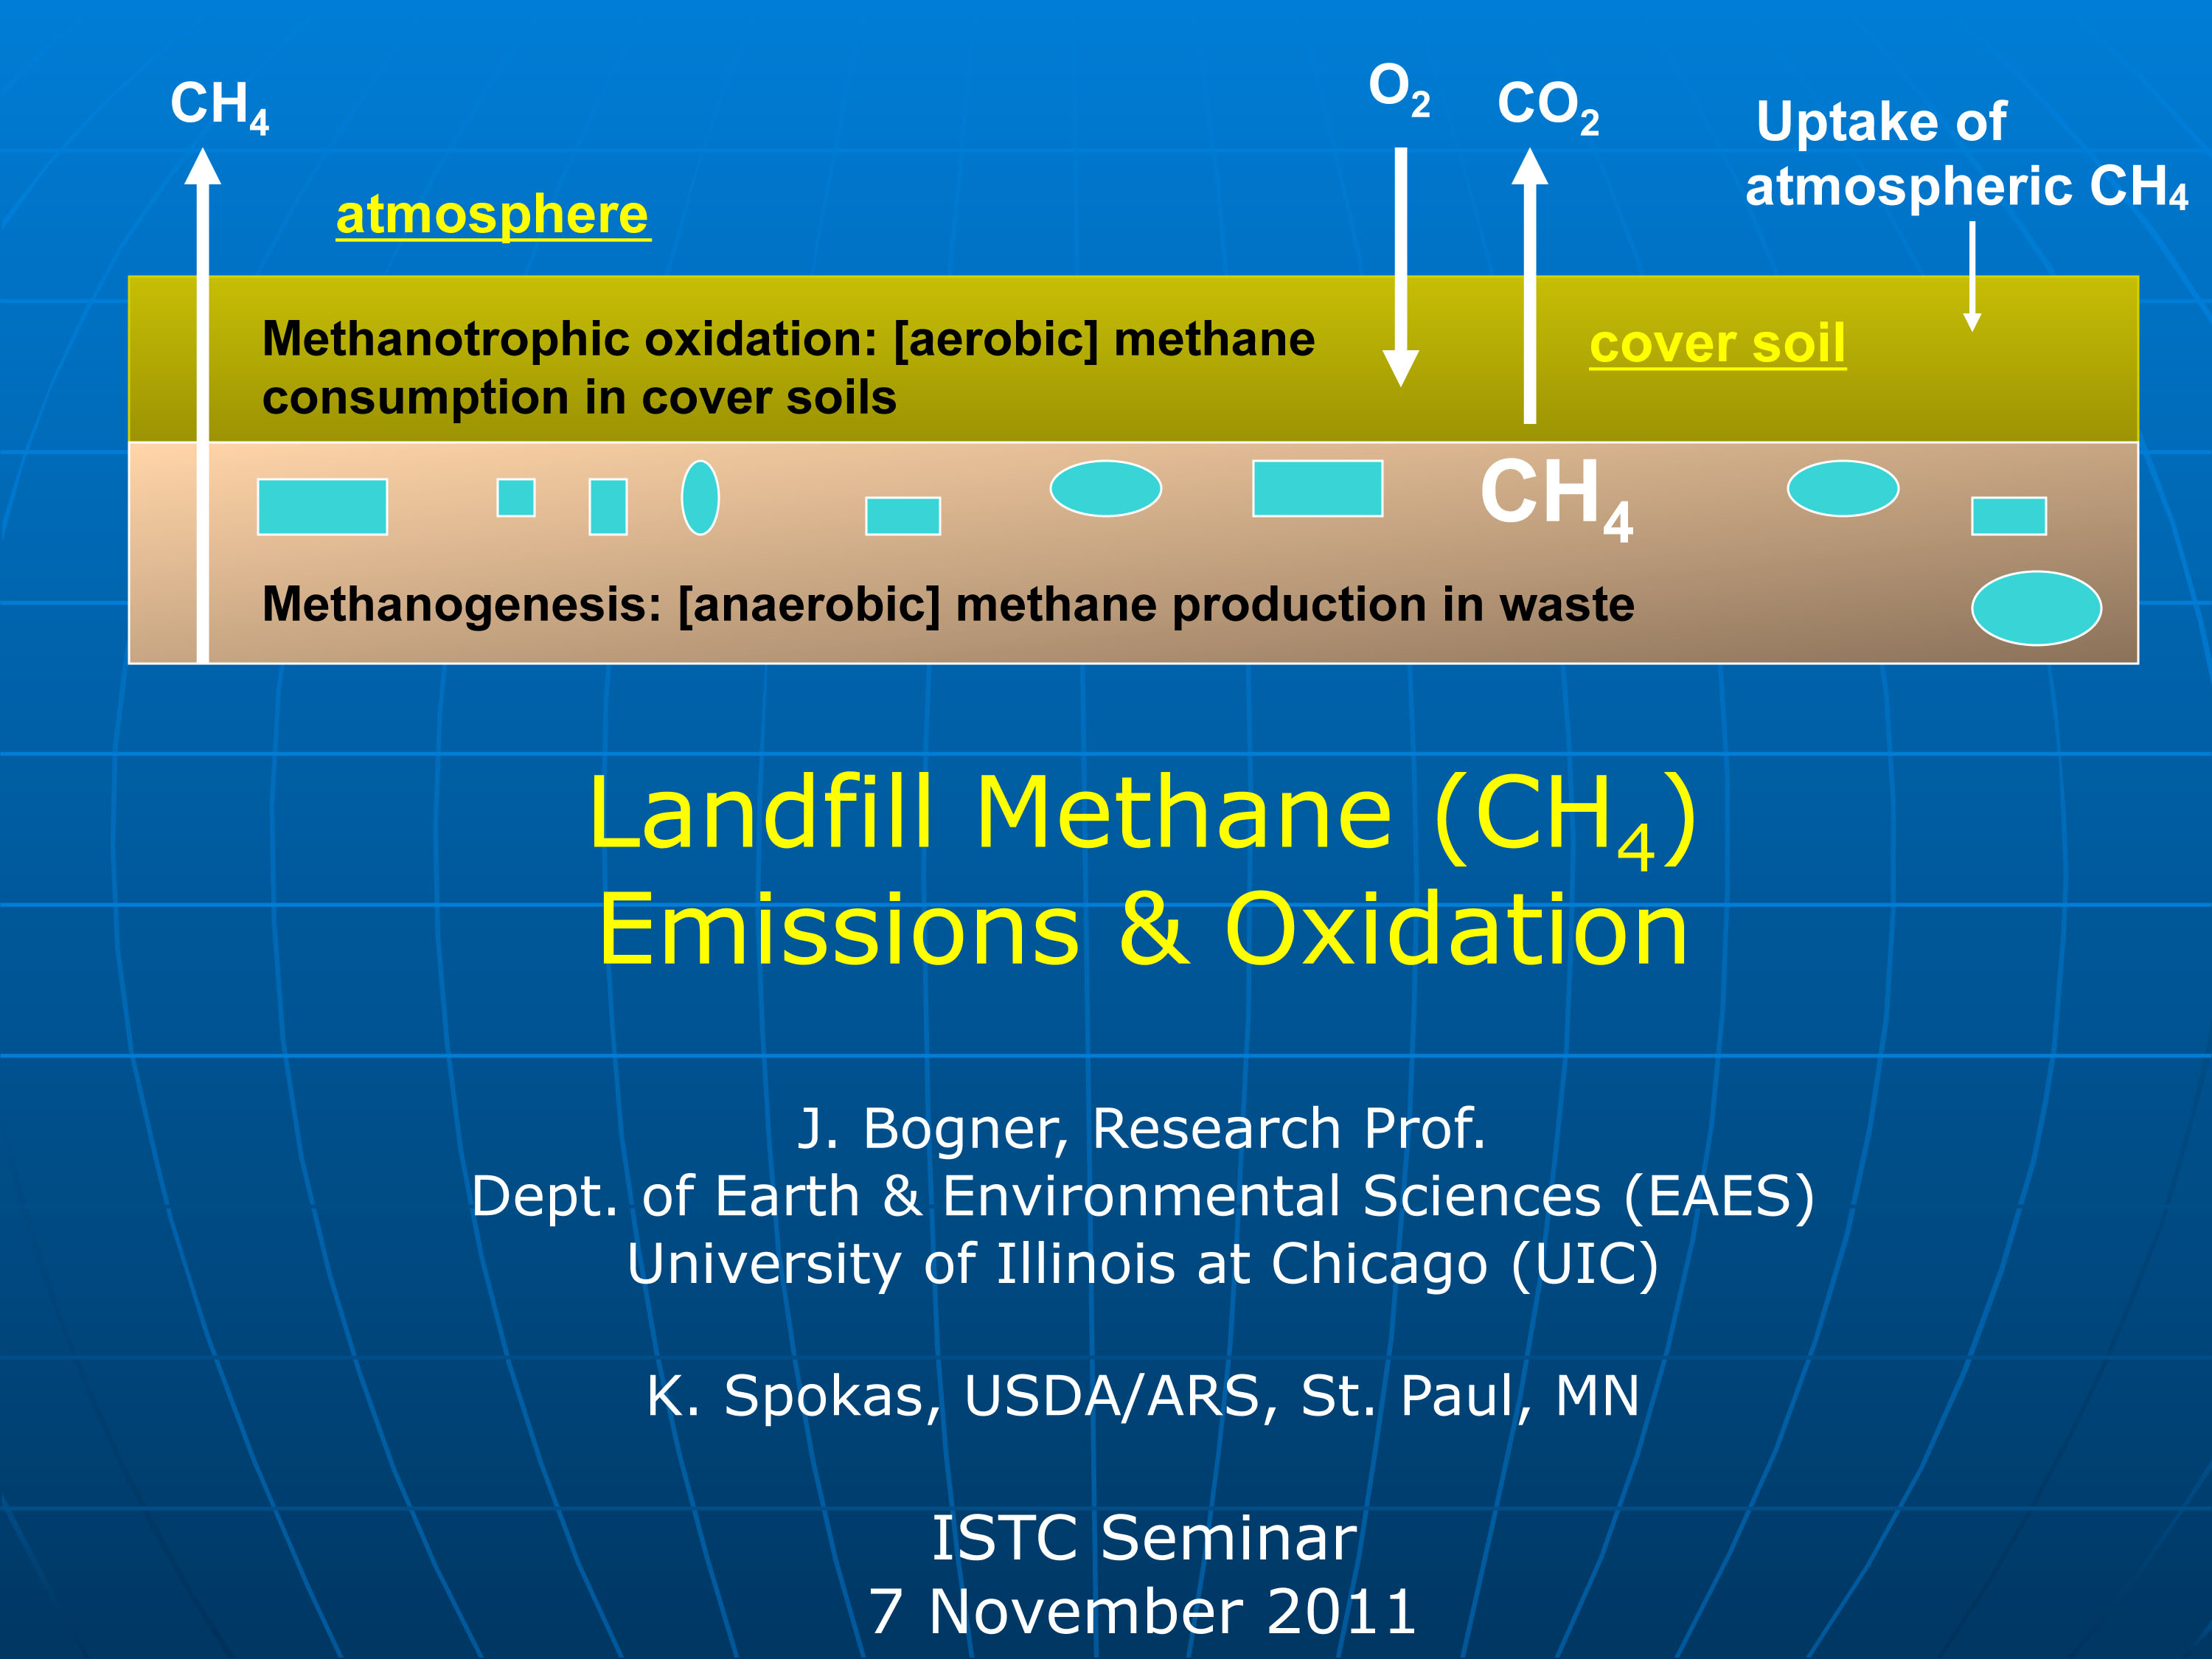 Title Slide: Landfill Methane Emissions and oxidation